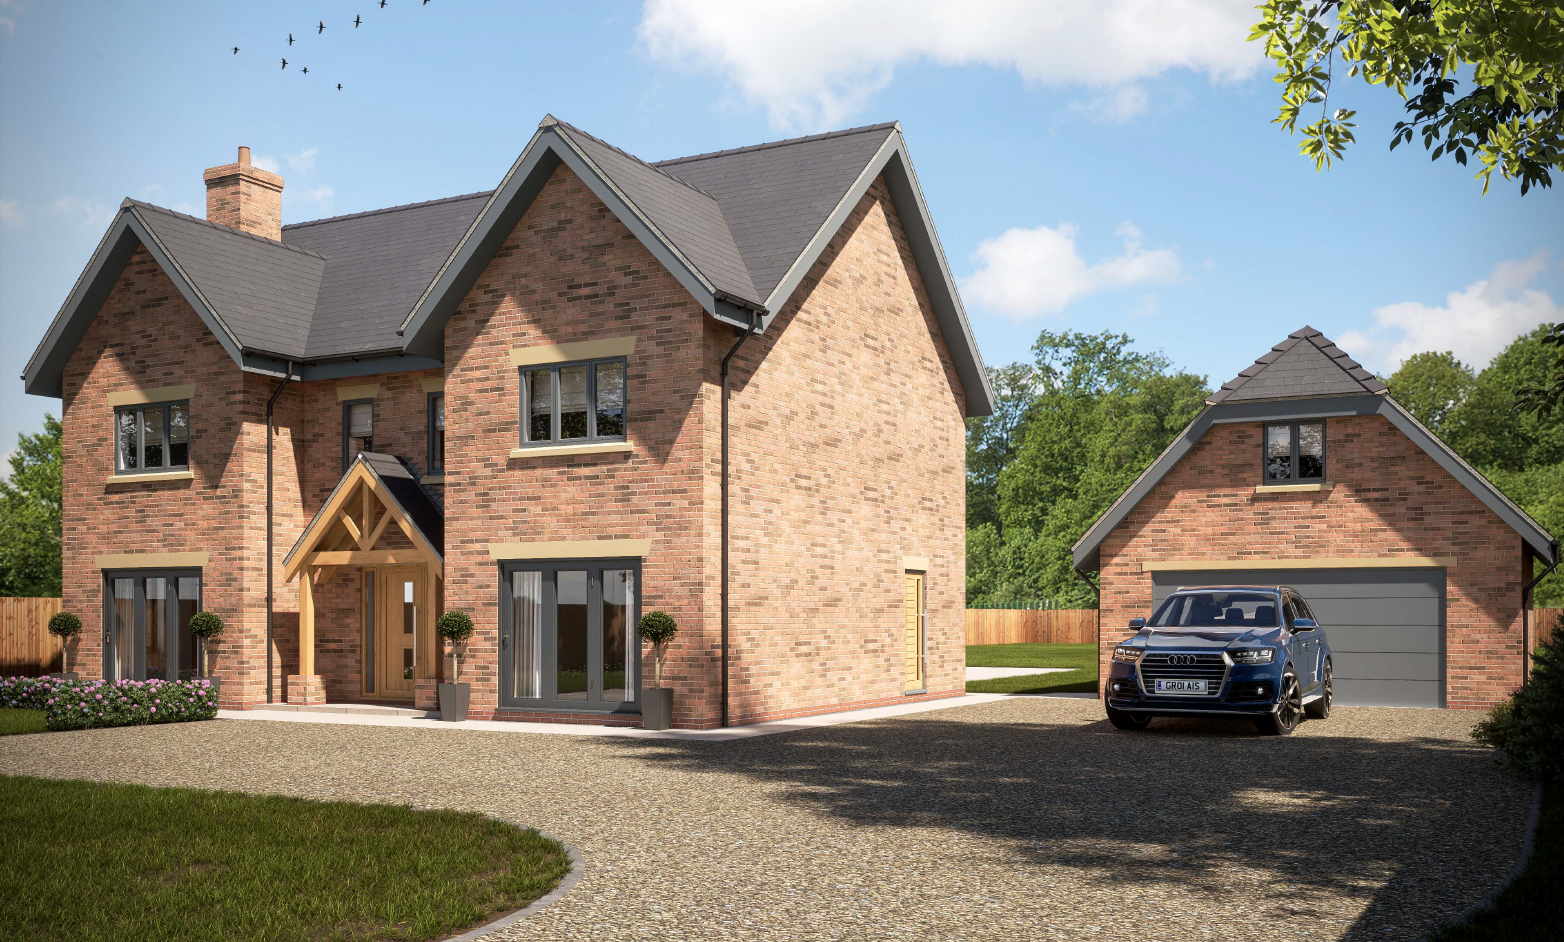 A self-build property in Sudbrooke, Lincoln that we gained planning permission for.